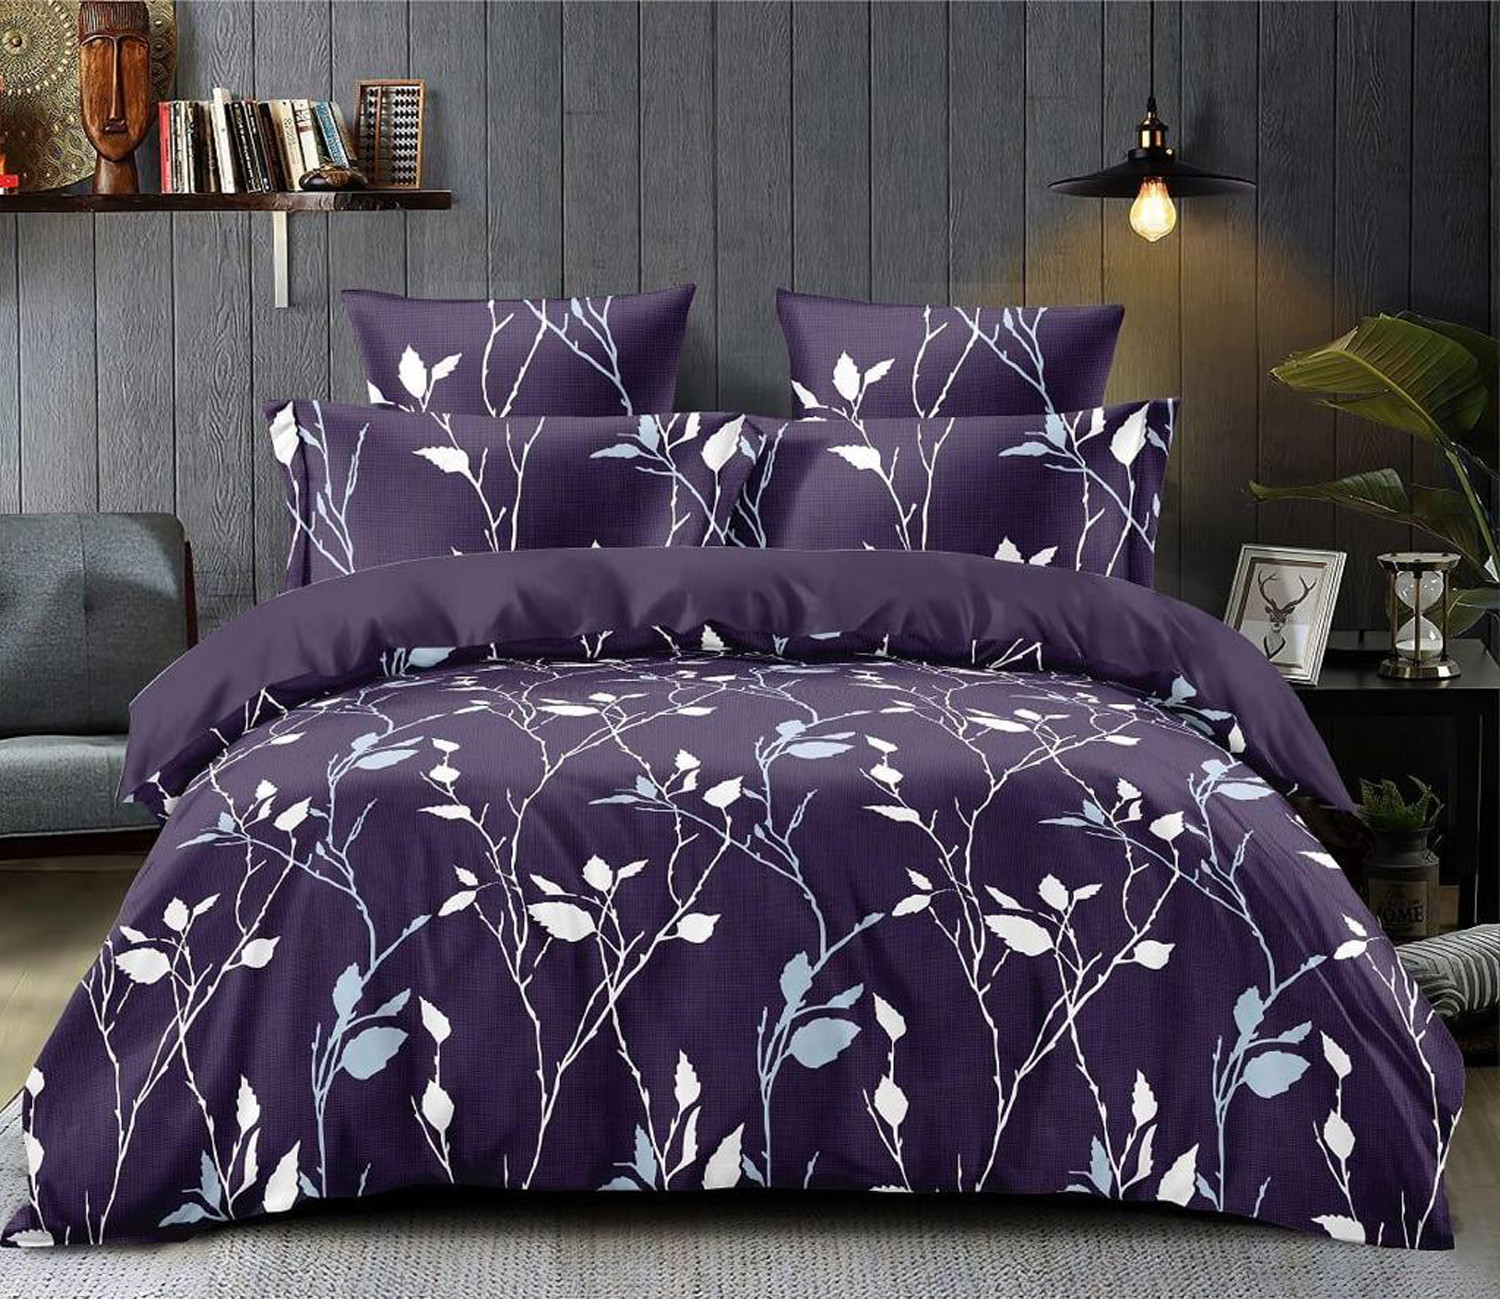 Kuber Industries Leaf Print Glace Cotton AC Comforter King Size Bed Comforter, Double Bed Sheet, 2 Pillow Cover (Purple, 90x100 Inches)-Set of 4 Pieces